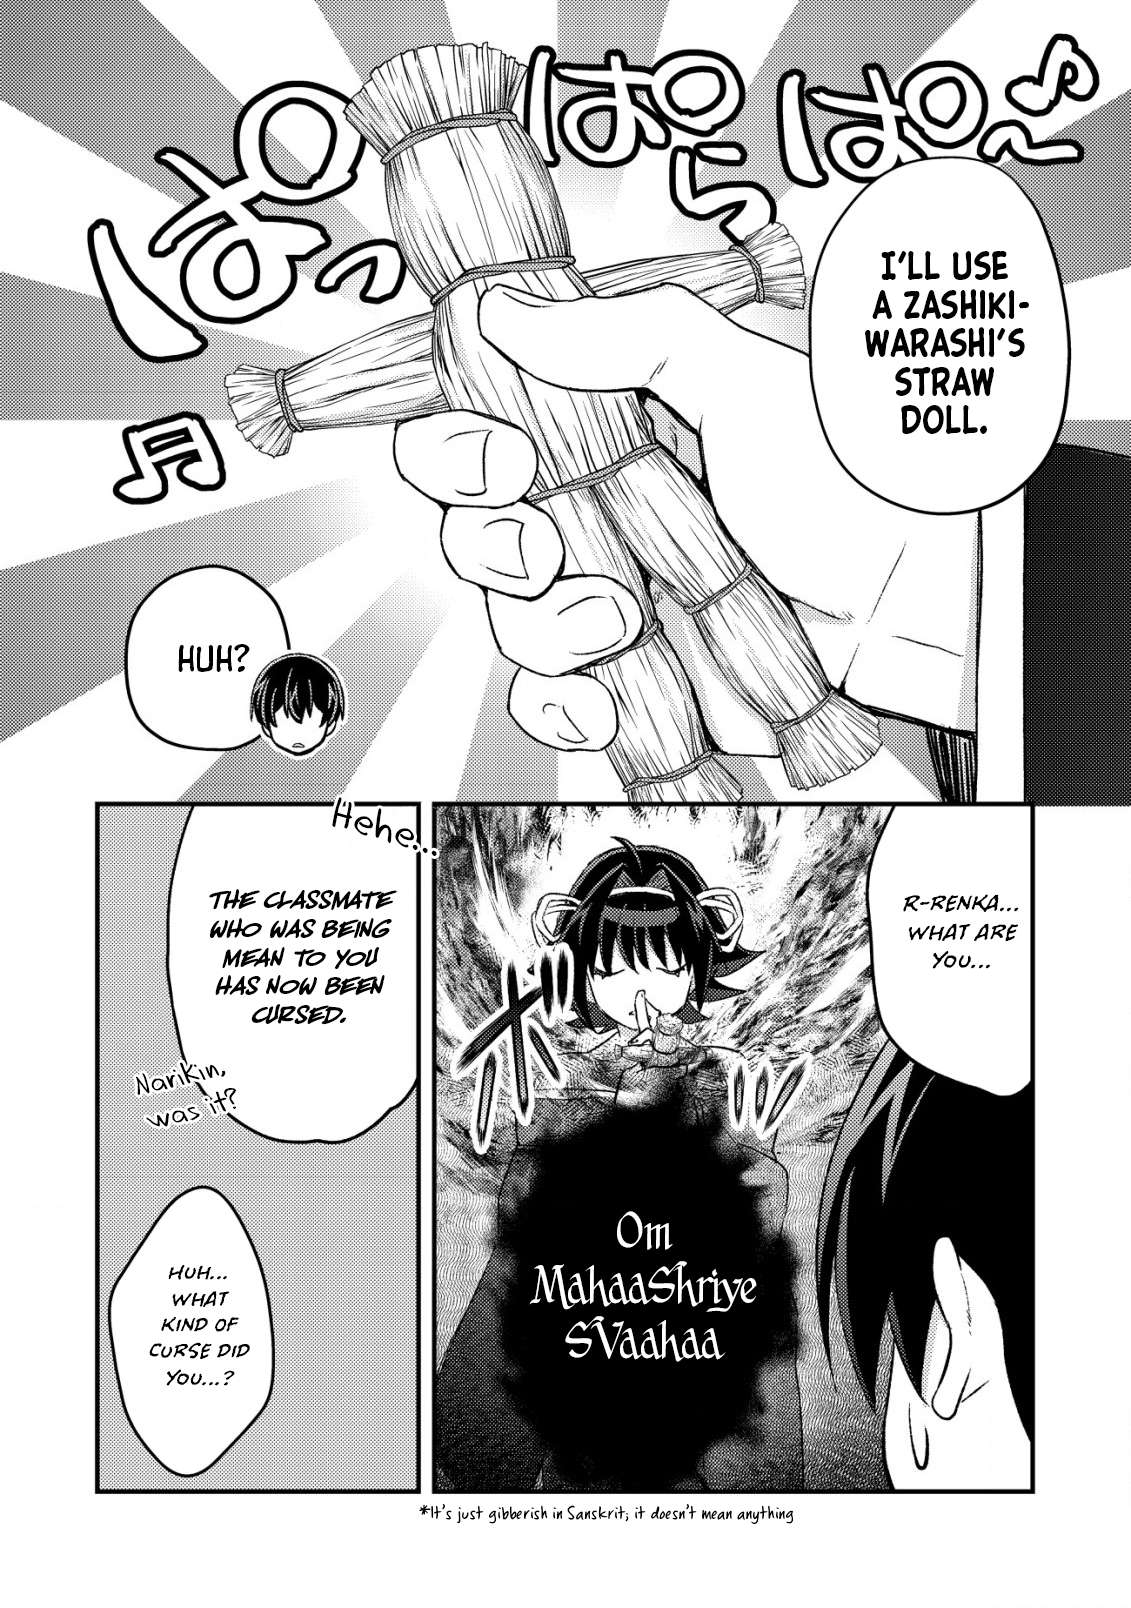 Can Even A Mob Highschooler Like Me Be A Normie If I Become An Adventurer? - chapter 20 - #4